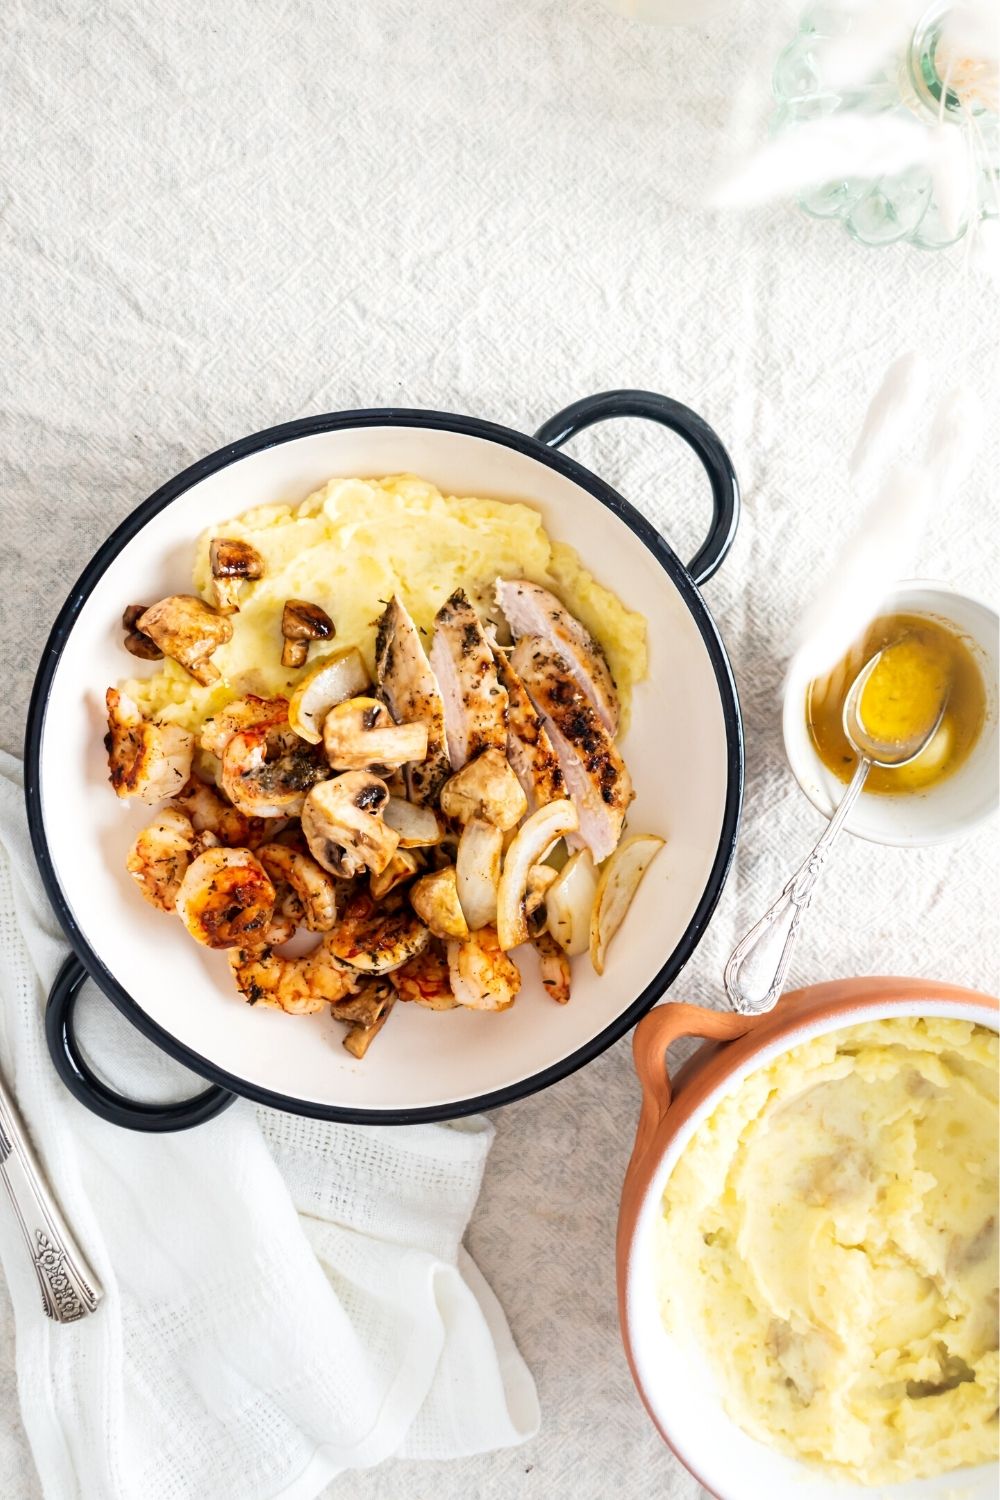 Mushrooms, grilled chicken, grilled shrimp, and potato purée in a white bowl. In front of the bowl is part of a white bowl that is filled with a potato purée.